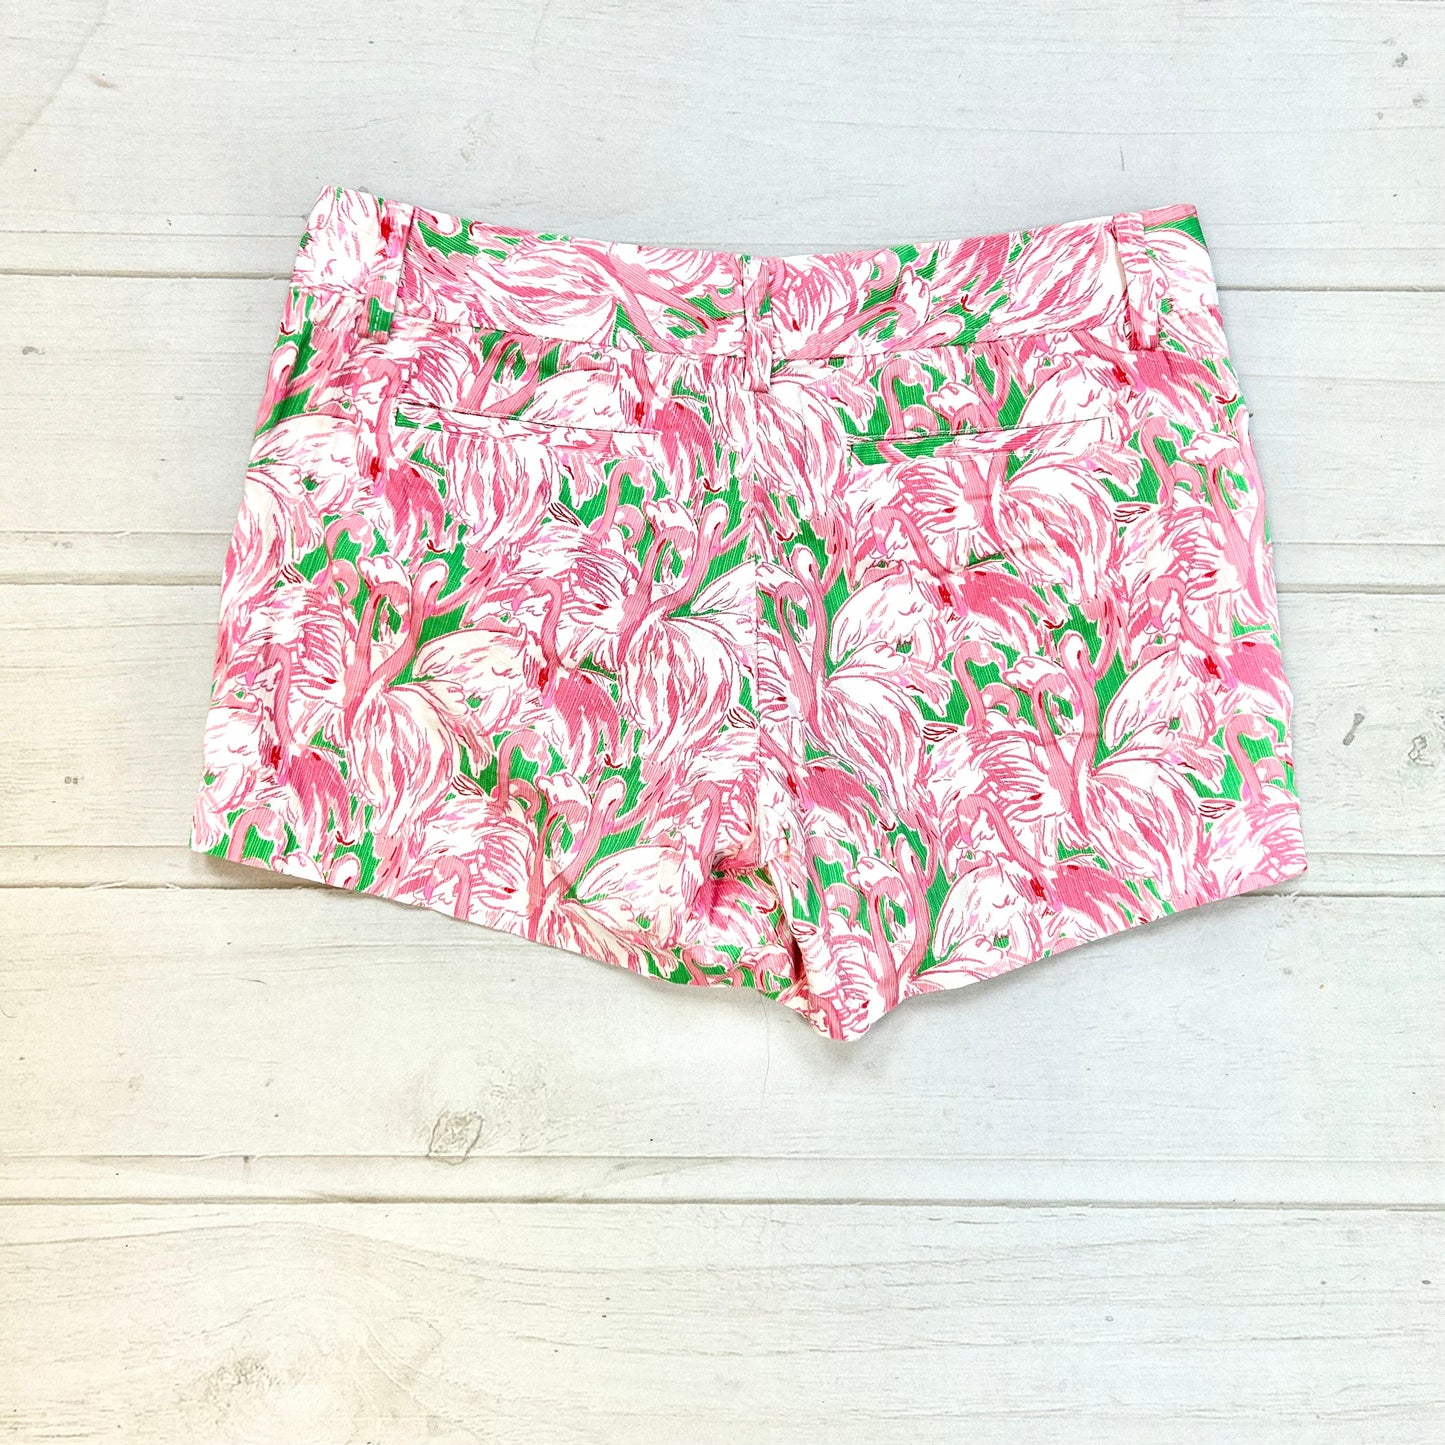 Shorts Designer By Lilly Pulitzer  Size: 8